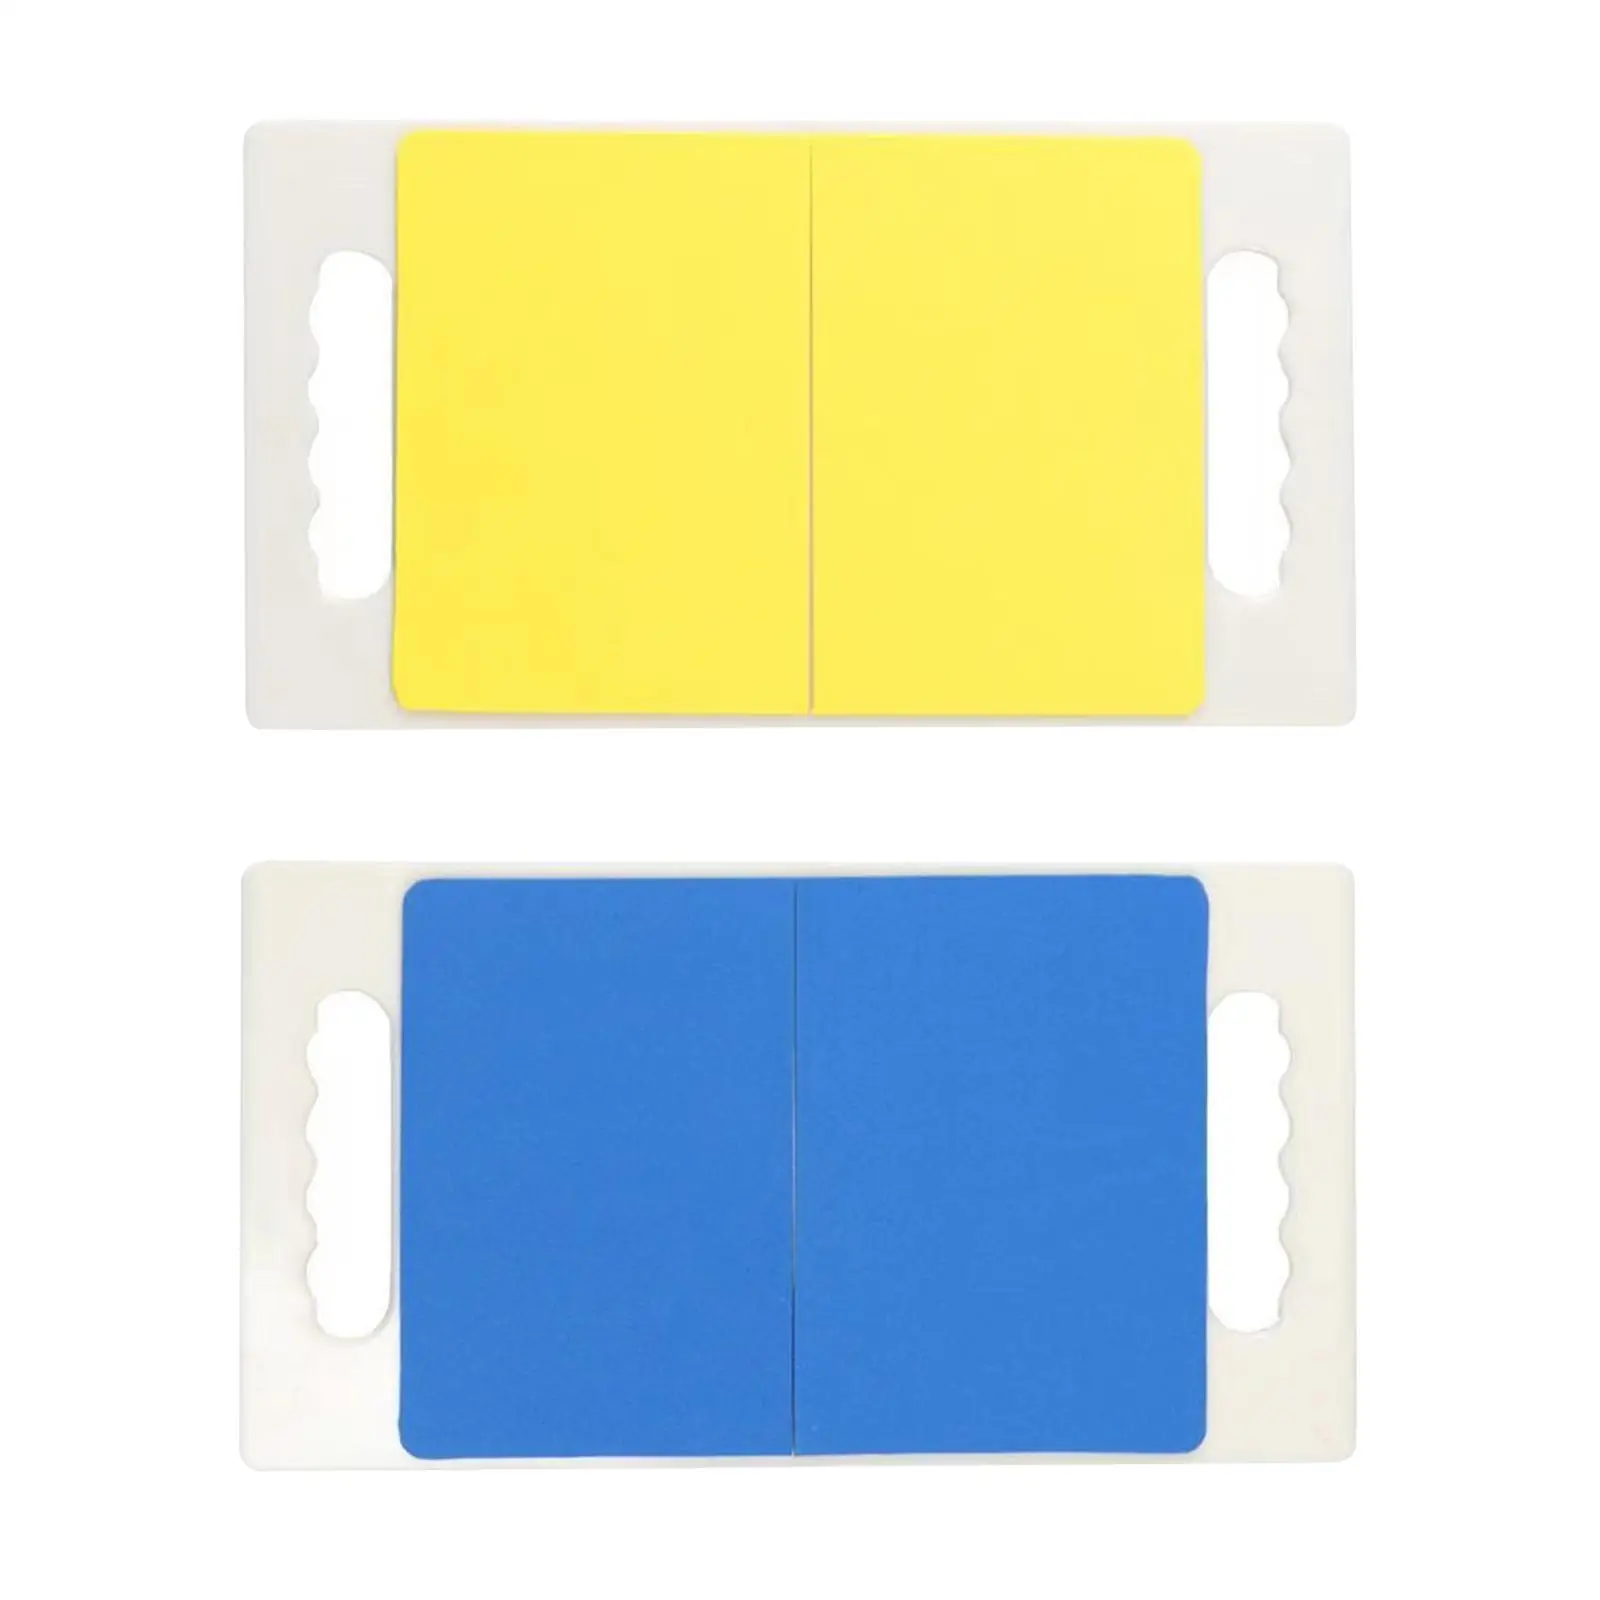 

Kids Taekwondo Karate Board Rebreakable Board Practice with Handle Reusable Pad Durable Breakable Boards for Boxing Equipment